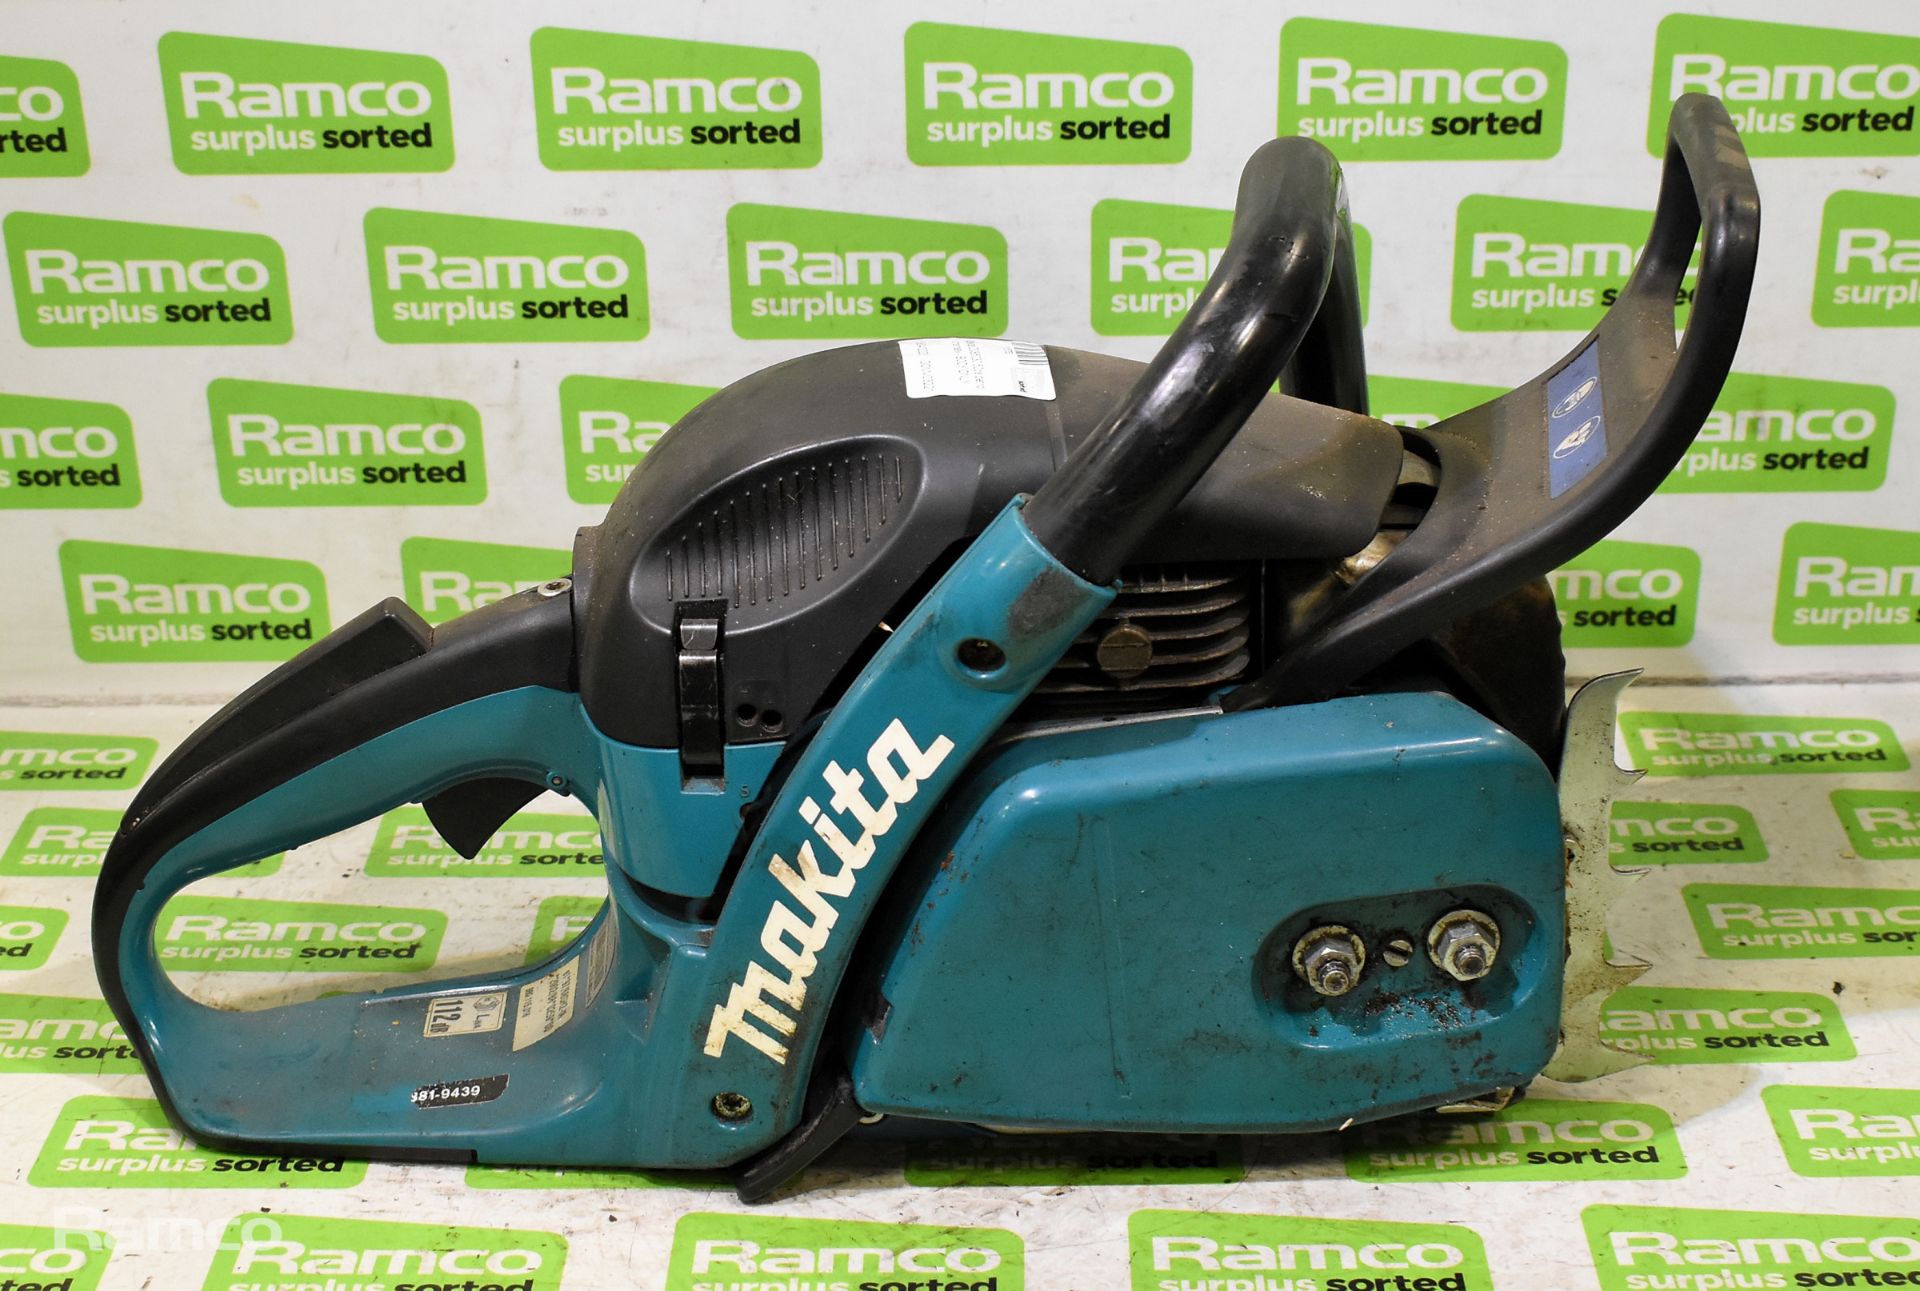 2x Makita DCS5030 50cc petrol chainsaw - BODIES ONLY - AS SPARES AND REPAIRS - Image 2 of 11